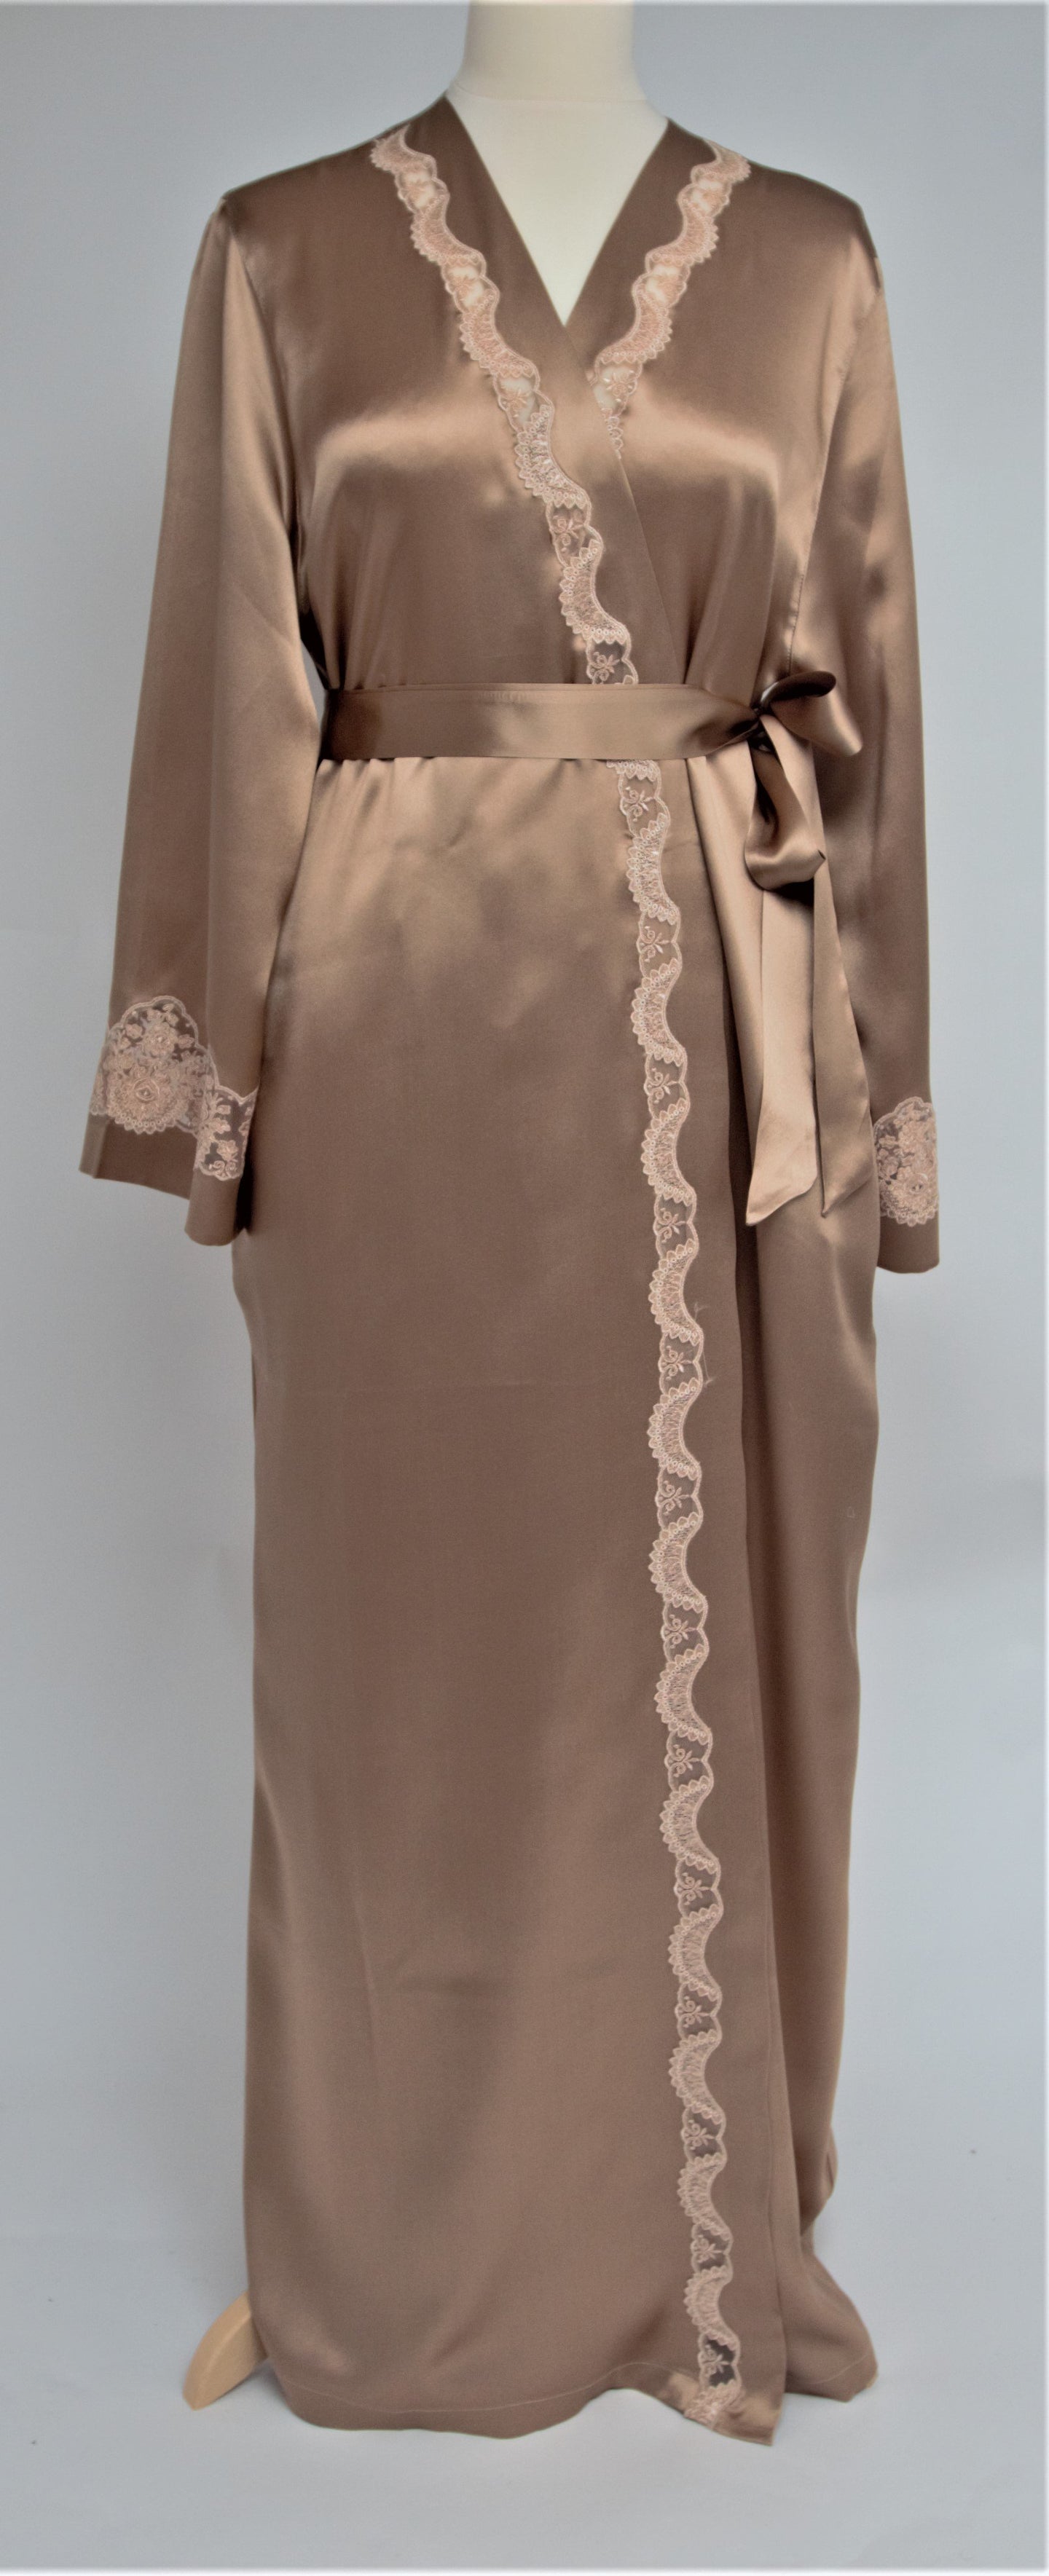 Full length dressing gown in pure silk satin in collarless kimono style.  2 side pockets and belted at the waist.